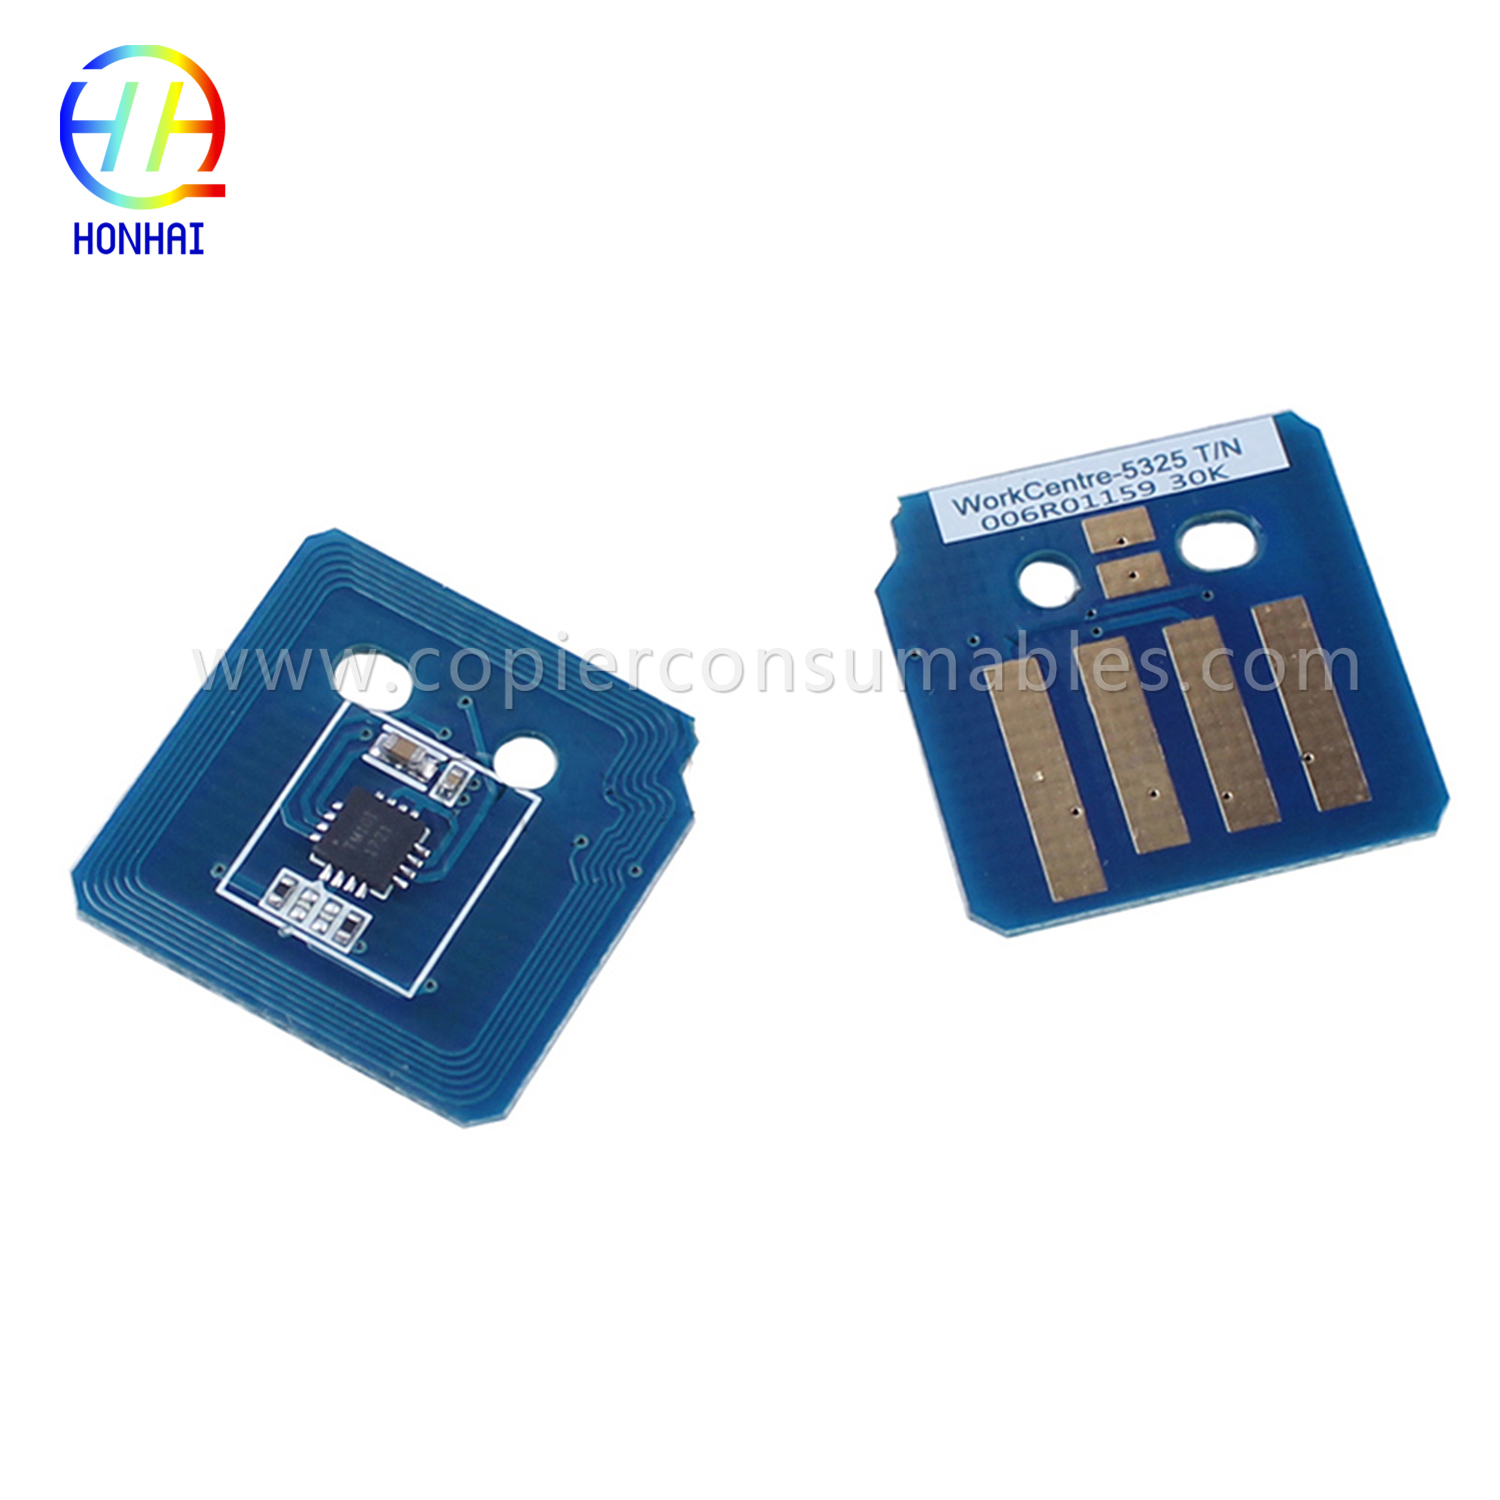 Toner Chip for Xerox Workcentre 5325 5330 5335 (006R01159 6R1159) (3) 拷贝